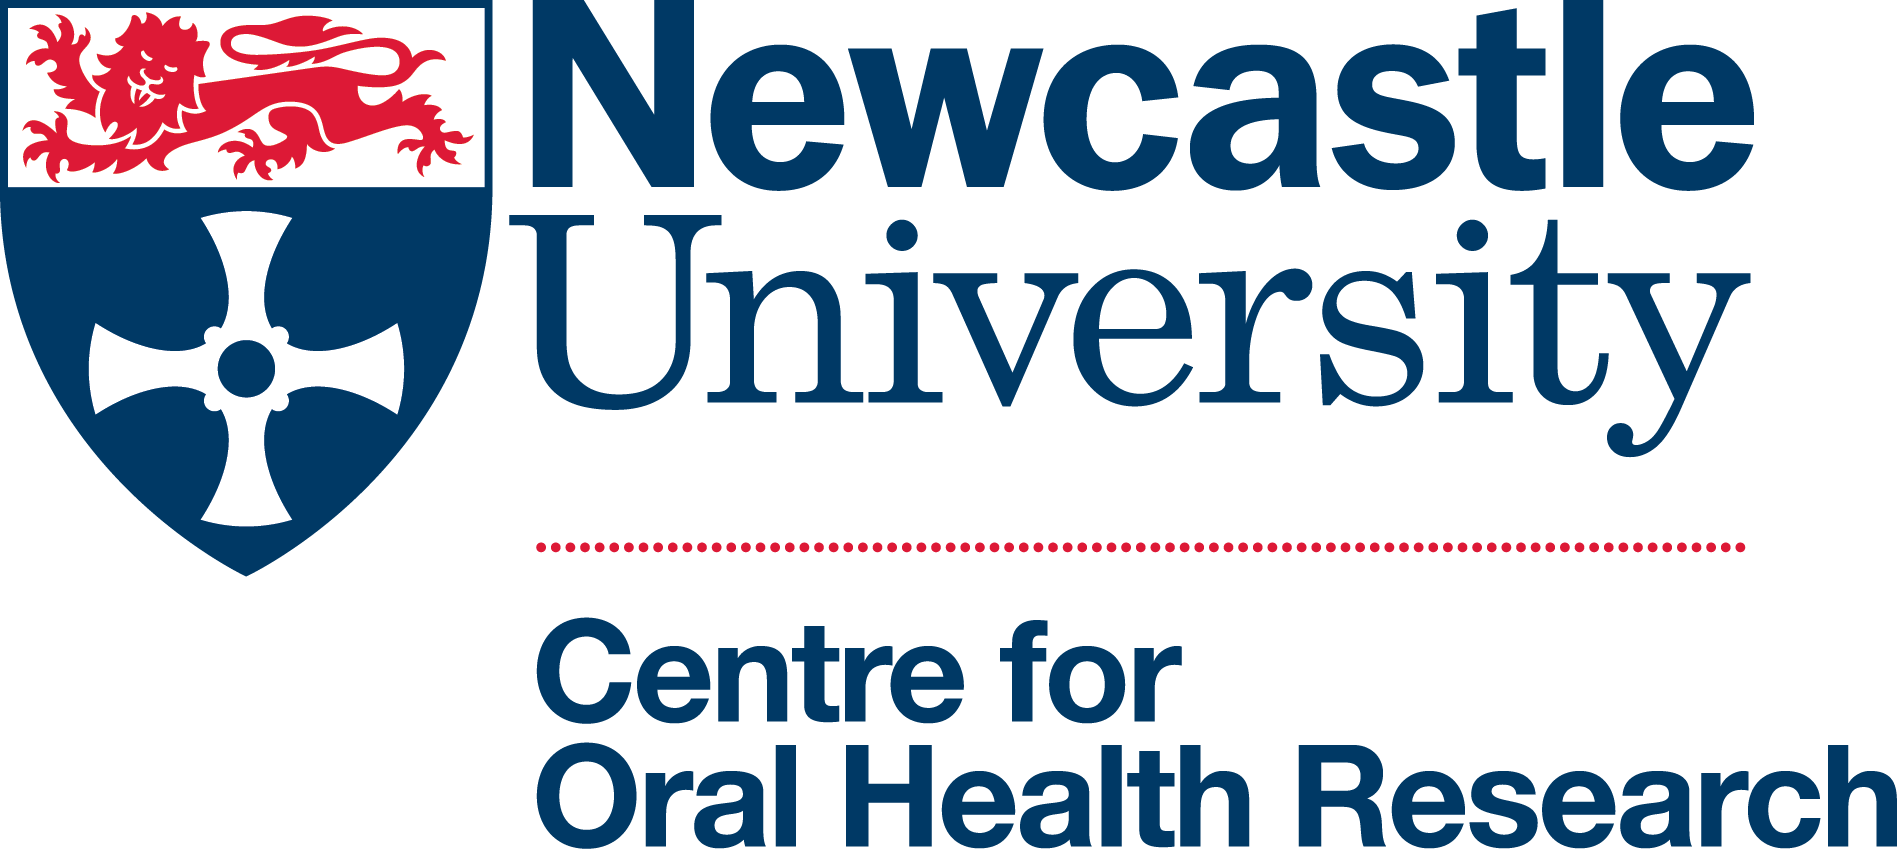 NU - Logo - Centre for Oral Health Research - Positive (CMYK)